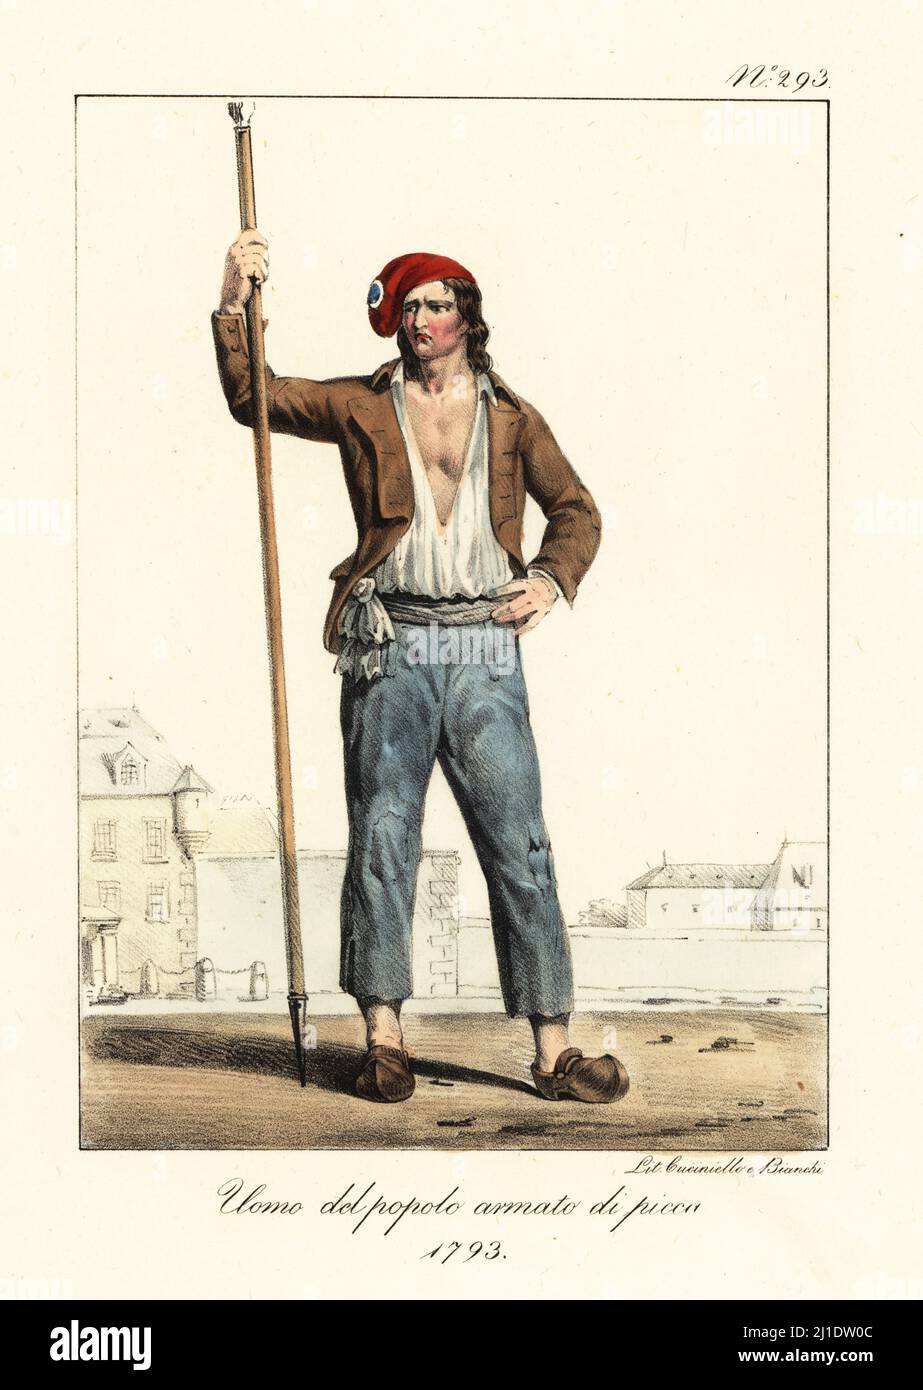 Costume of a commoner or sans culotte, French Revolution, 1793. He wears a red Phrygian cap with tricolor cockade, brown carmagnole coat, shirt, trousers, sabots or clogs, and holds a pike. Homme du people, arme d'une pique. Handcoloured lithograph by Lorenzo Bianchi and Domenico Cuciniello after Hippolyte Lecomte from Costumi civili e militari della monarchia francese dal 1200 al 1820, Naples, 1825. Italian edition of Lecomte’s Civilian and military costumes of the French monarchy from 1200 to 1820. Stock Photo